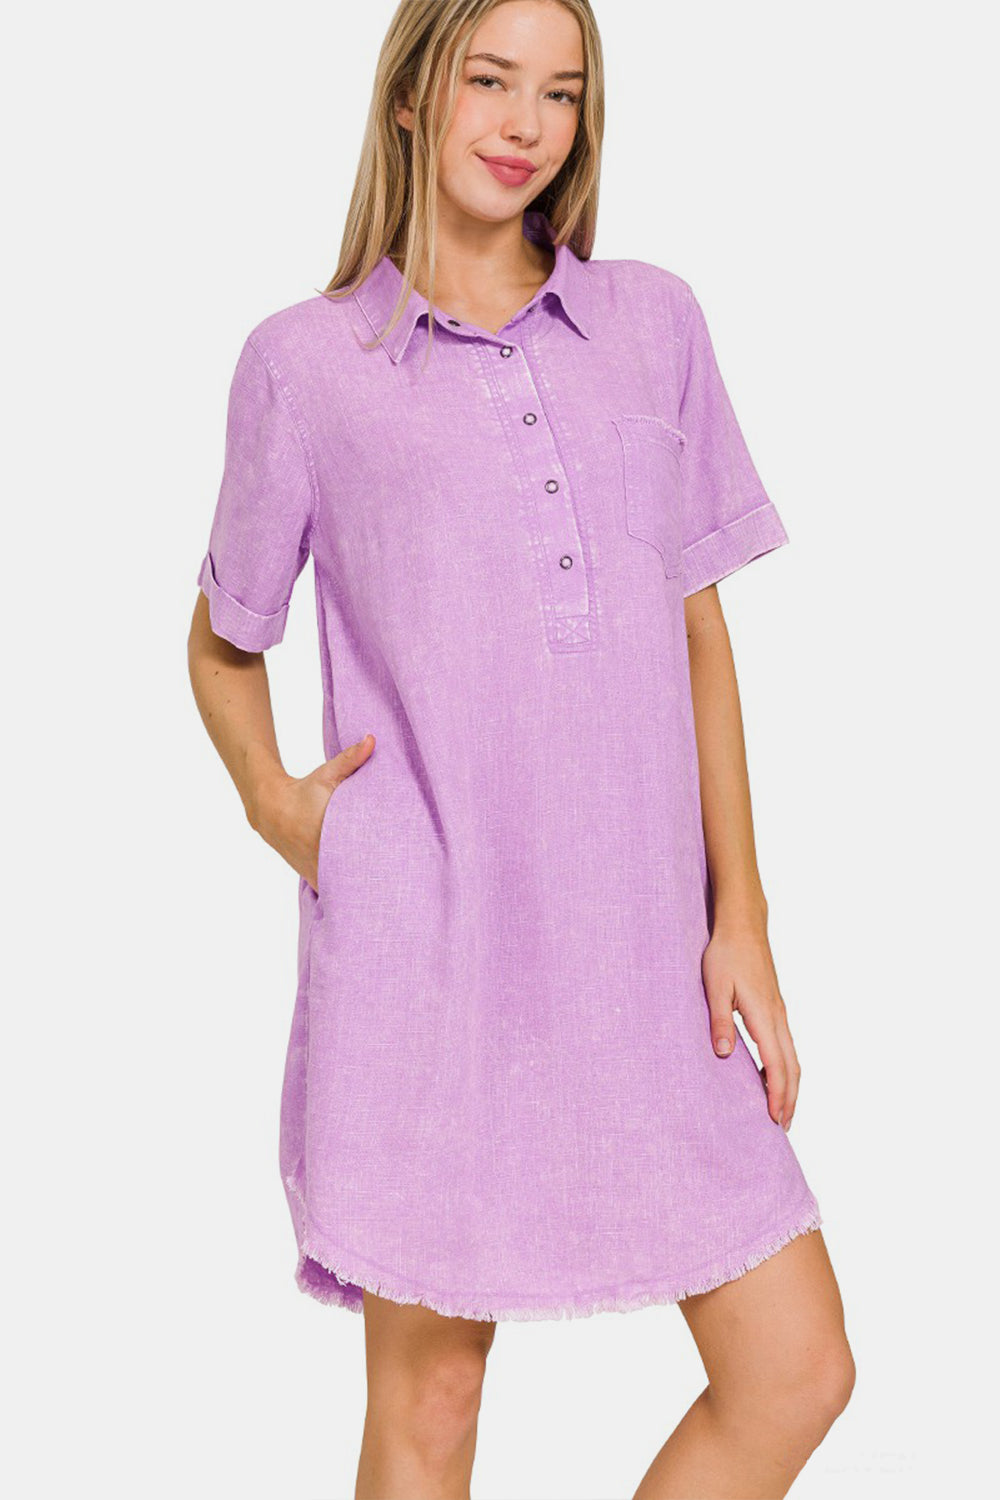 Women's Purple Linen Tennis Dress with Short Sleeves and Pockets